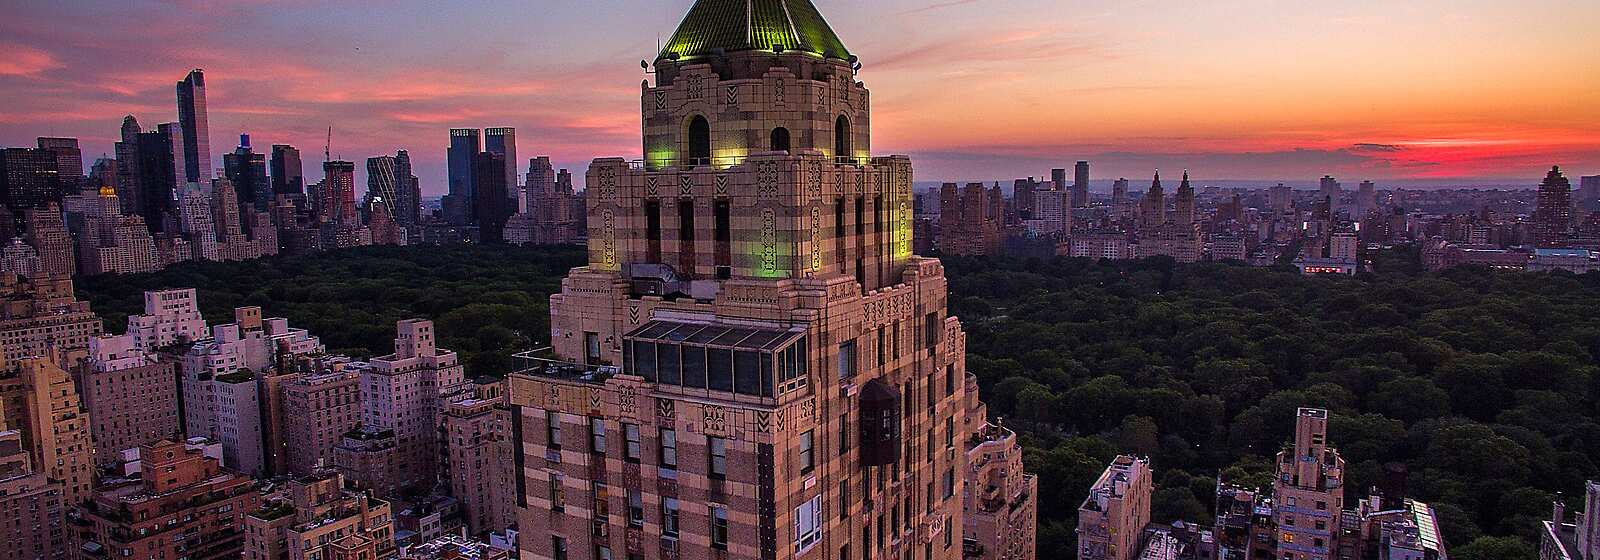 The Carlyle Hotel Aerial Shot